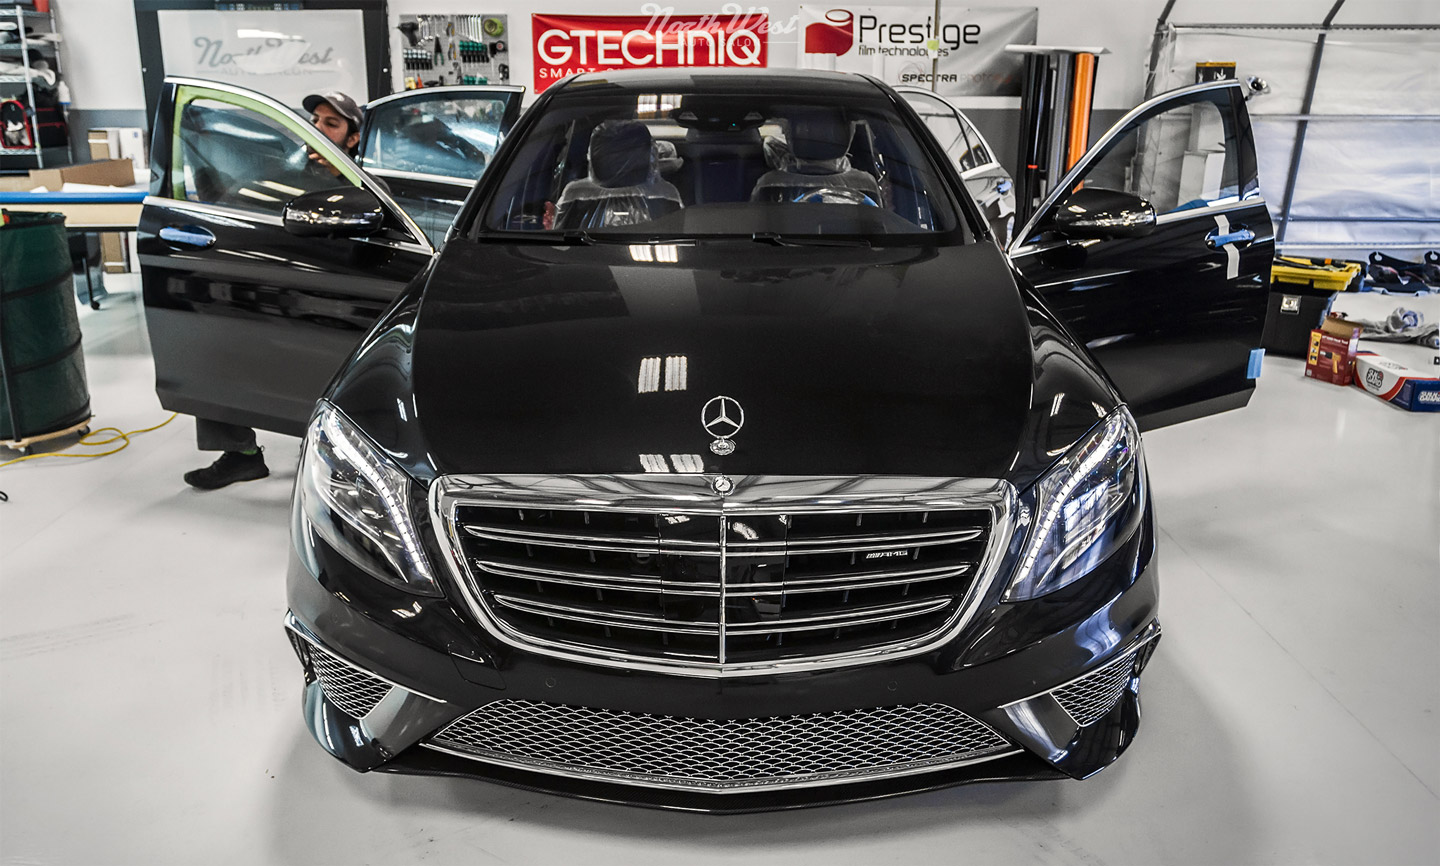 MB S65 AMG XPEL Ultimate Paint Protection Prestige Spectra PhotoSync Window Tint Gtechniq EXO Seattle Bellevue Lynnwood